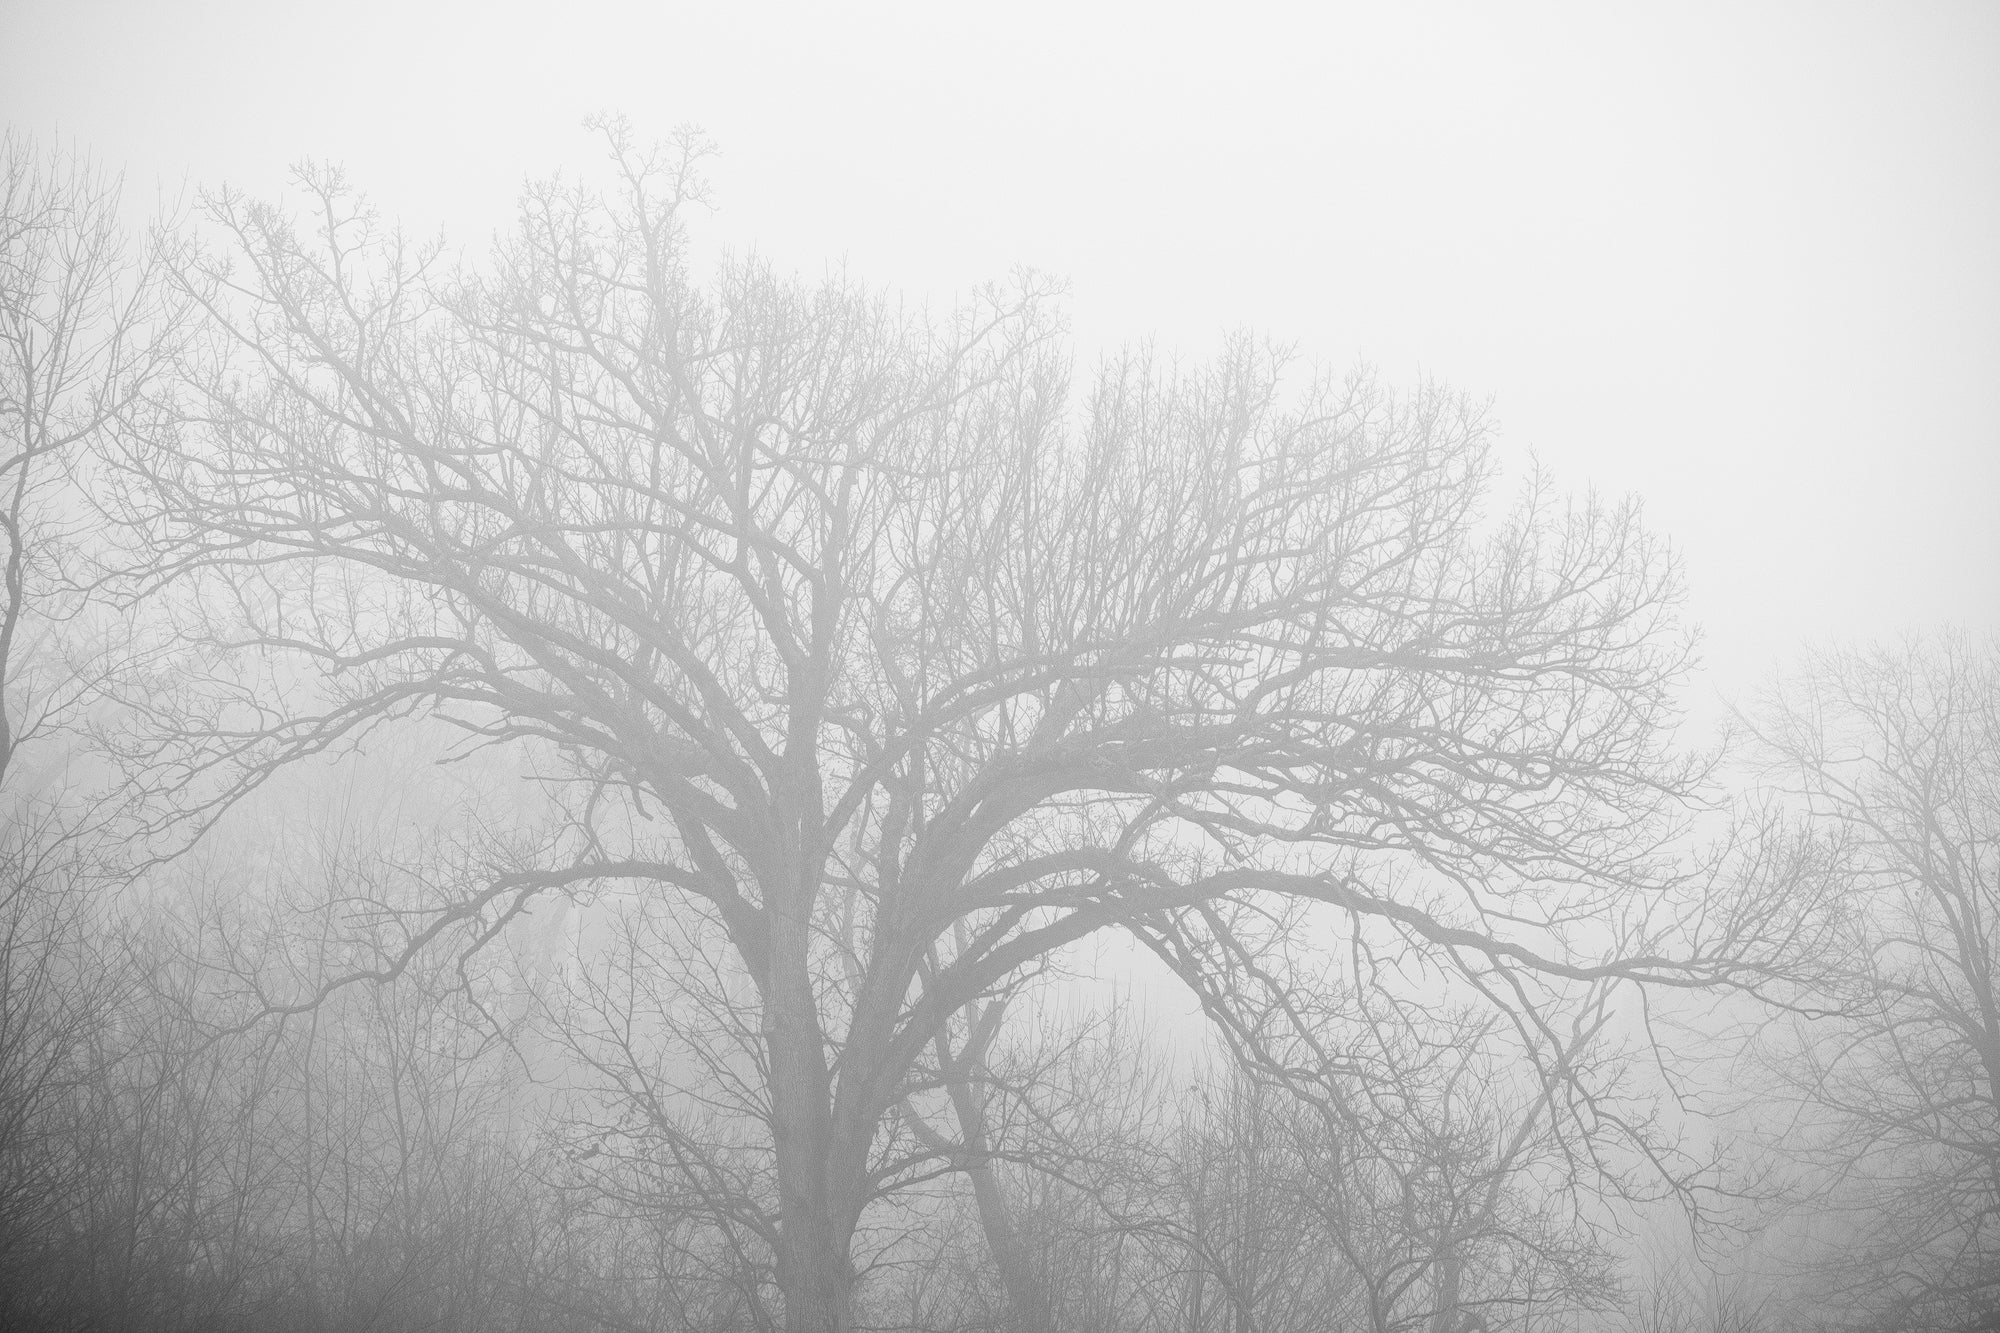 Foggy Morning Landscape - Black and White Landscape Photograph by Keith Dotson. Buy a print.